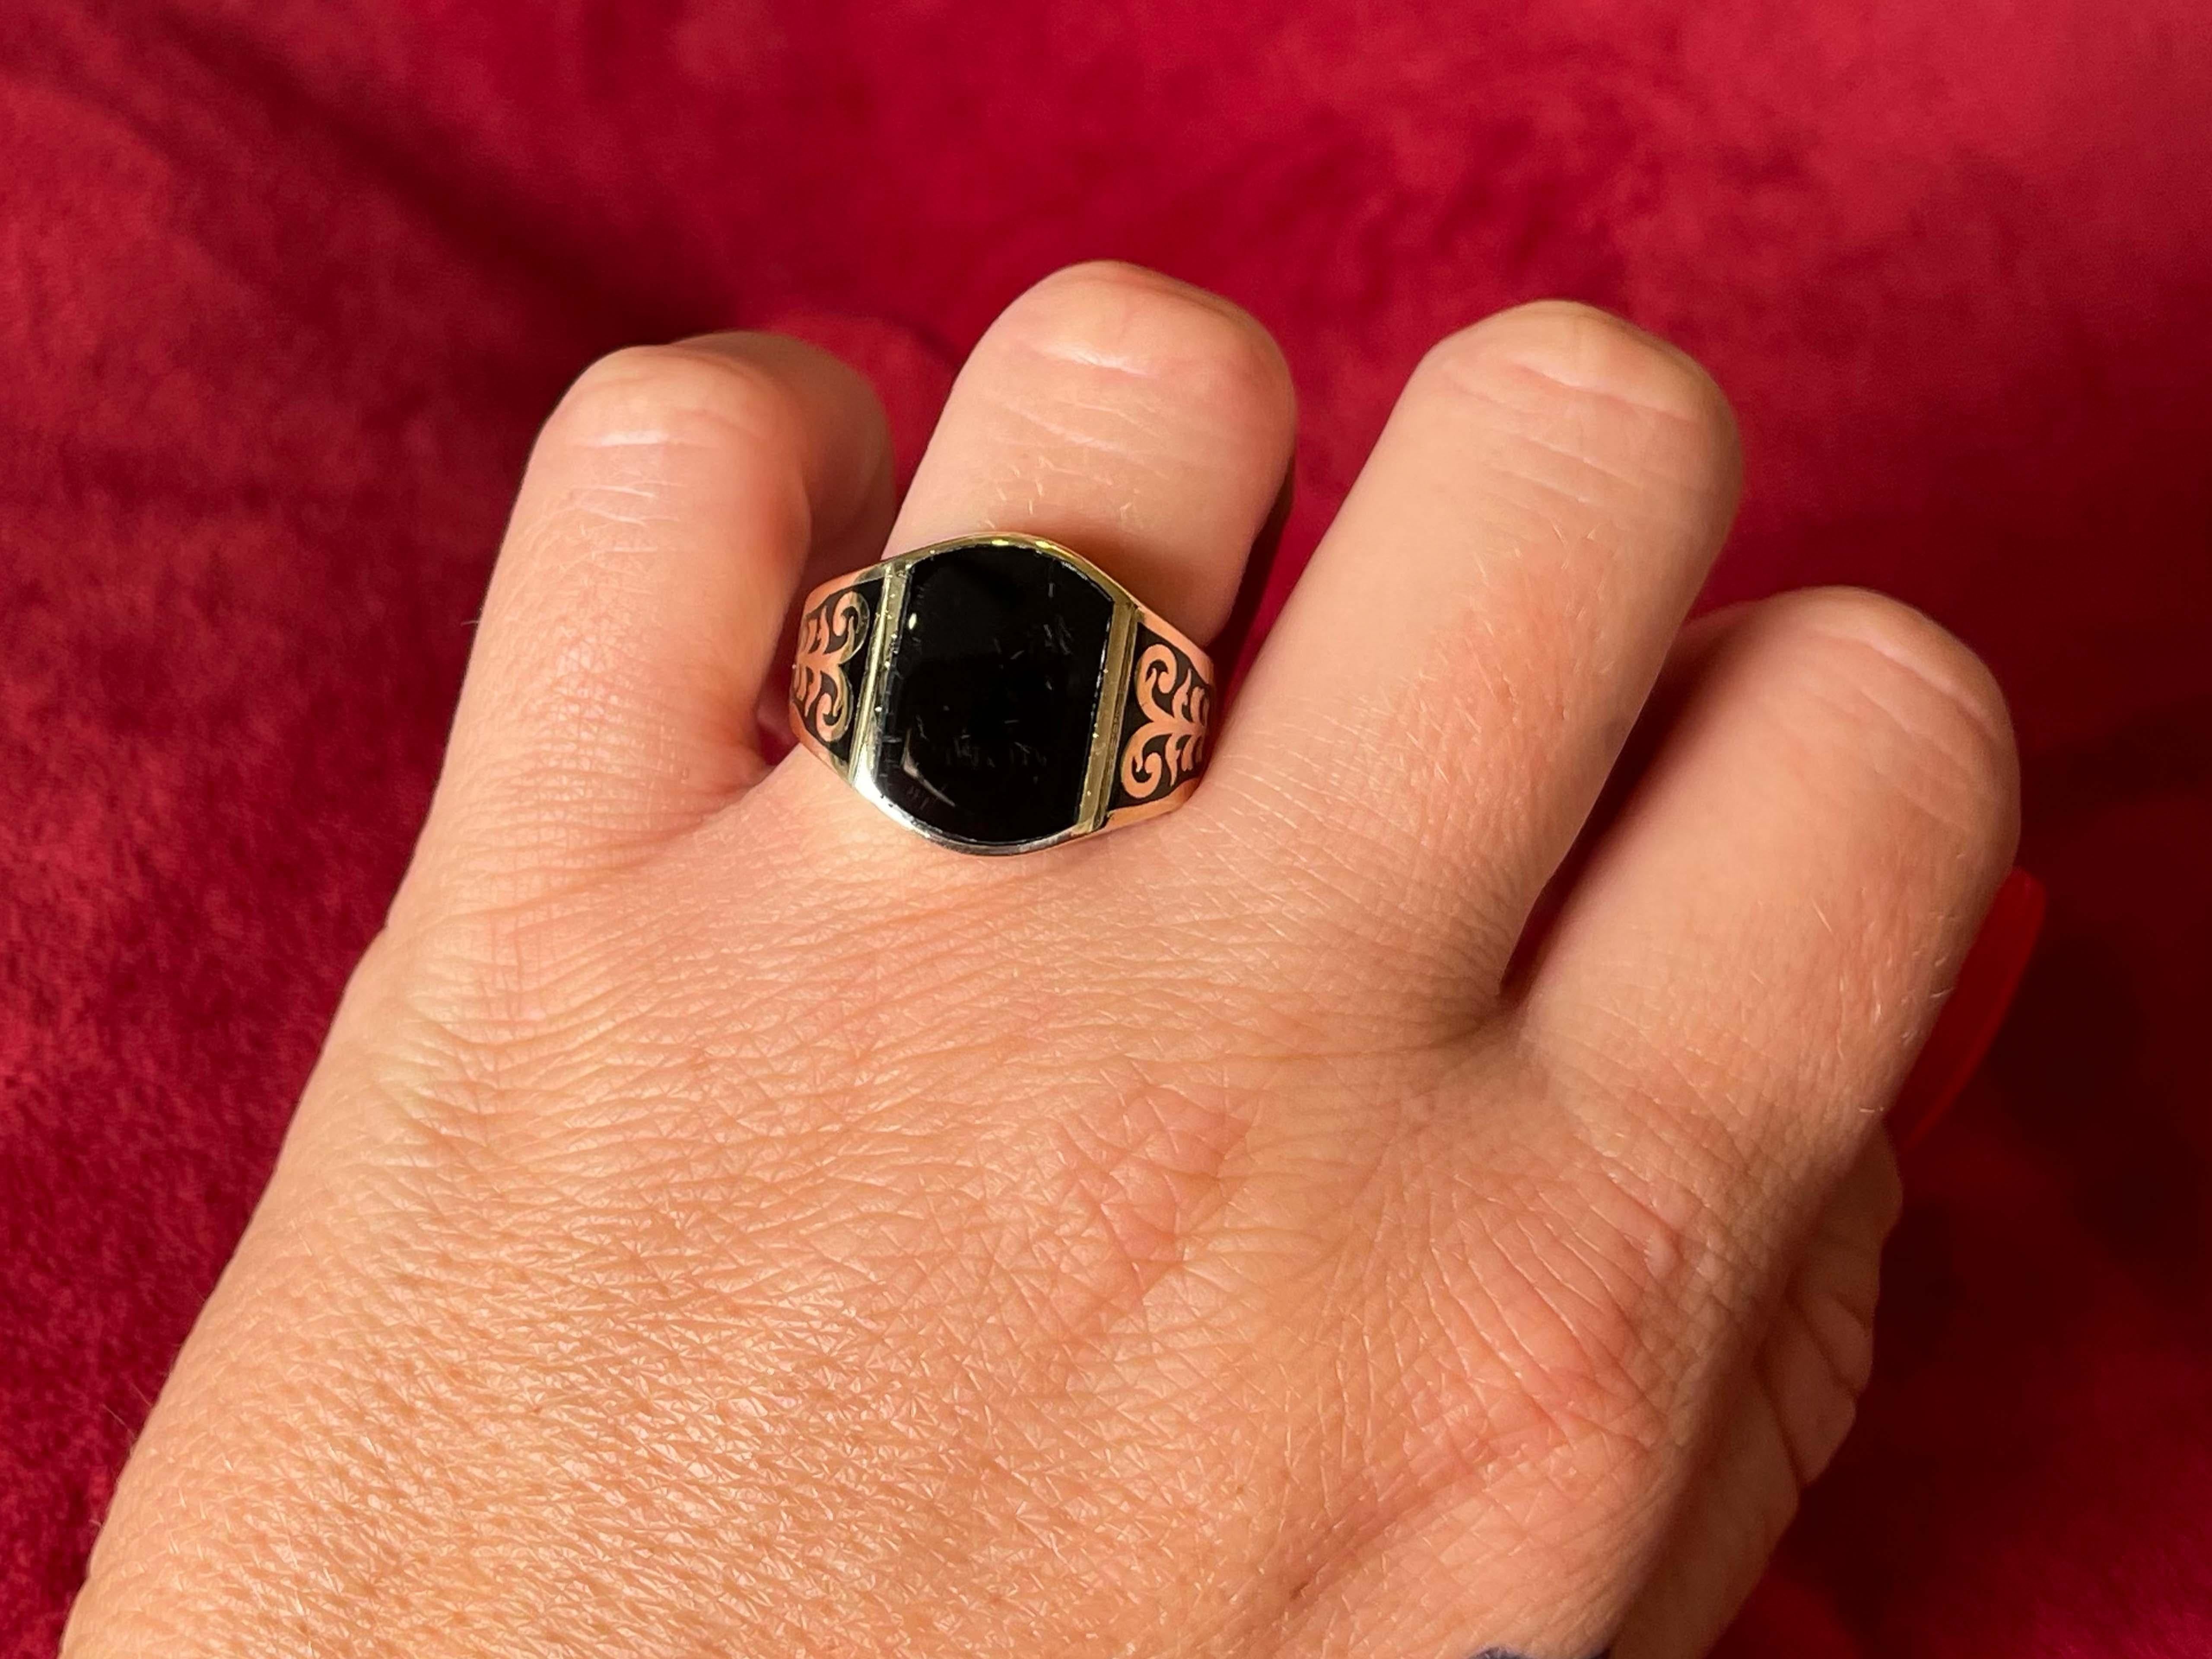 Mens Black Onyx Design Gold Ring 14K Yellow Gold
​
​Beautiful ageless onyx ring with onyx design on the shoulders, matches any style!
​
​Item Specifications:

Metal: 14K Yellow Gold

Total Weight: 10.4 Grams

Ring Size: 9
​
​Ring Height: 17 mm